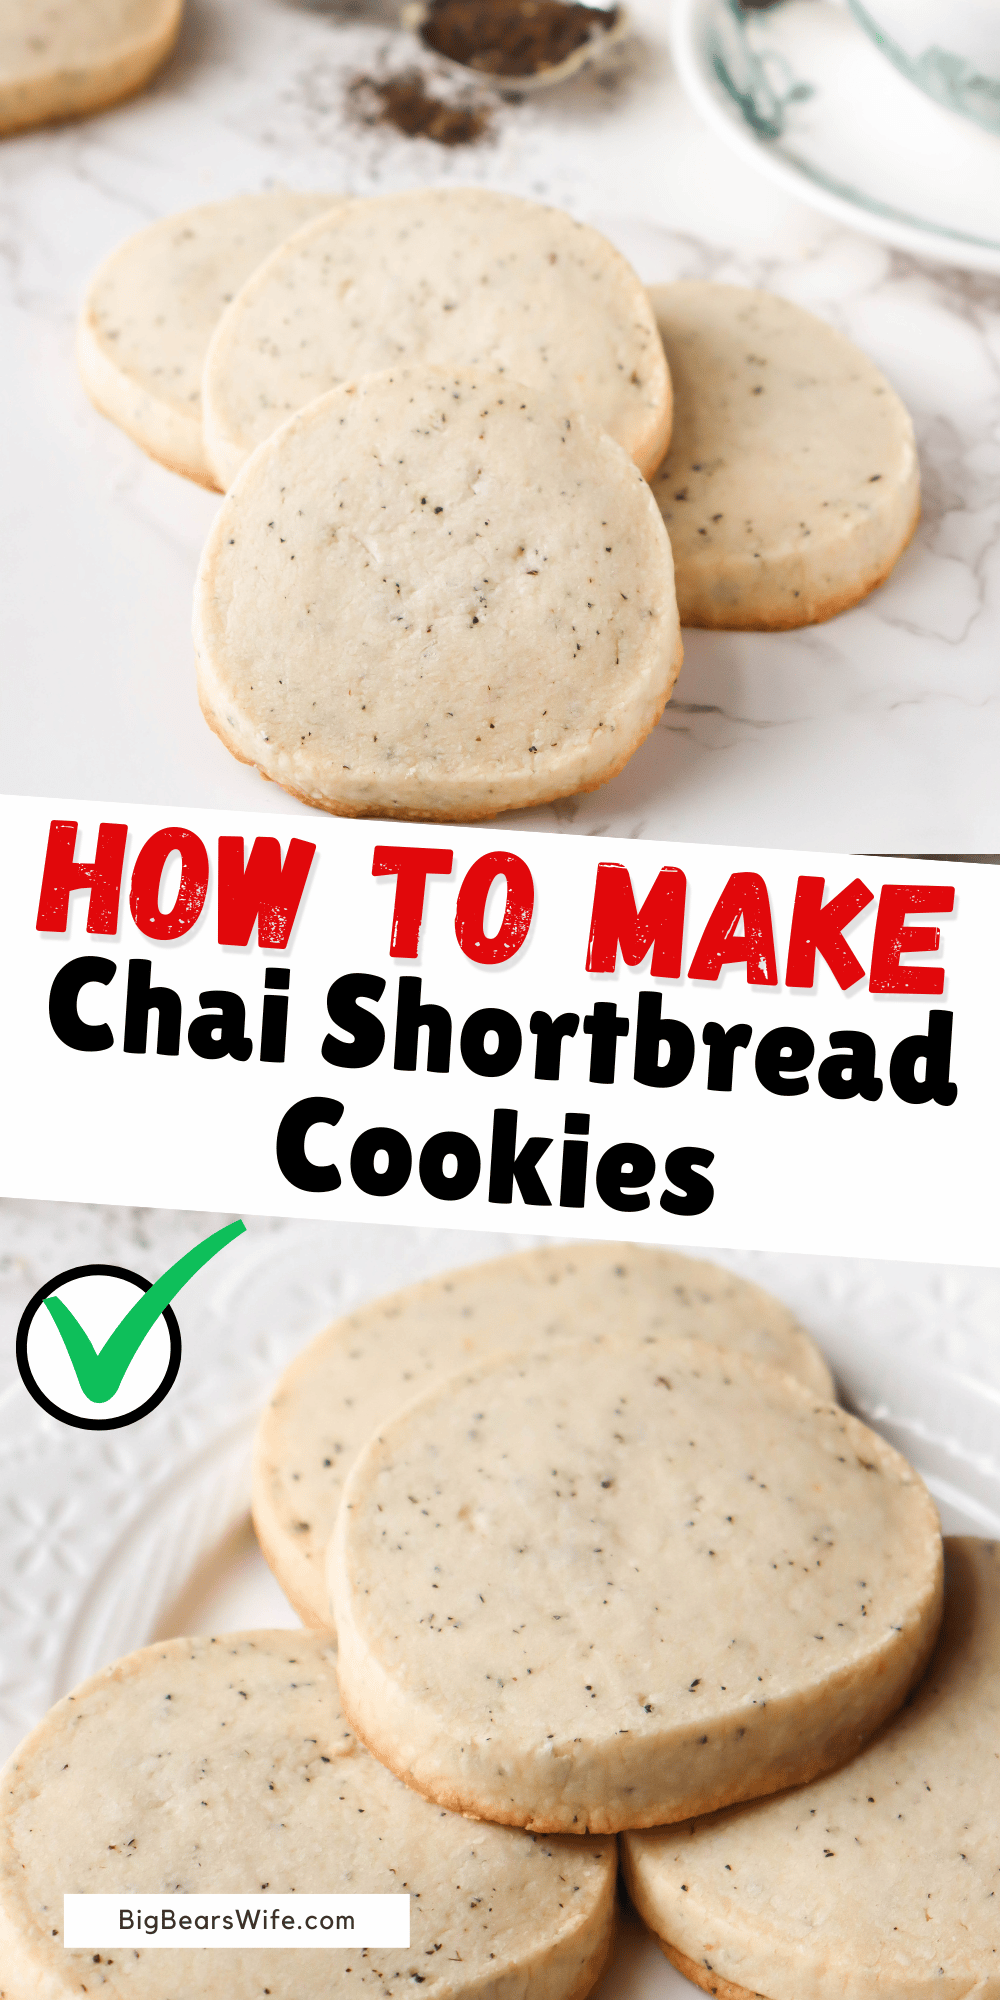 These wonderful slice-and-bake Chai Shortbread Cookies are filled with the warm spices of chai tea and so easy to make. Serve them up with a warm cup of chai, milk or coffee for a cozy treat. via @bigbearswife